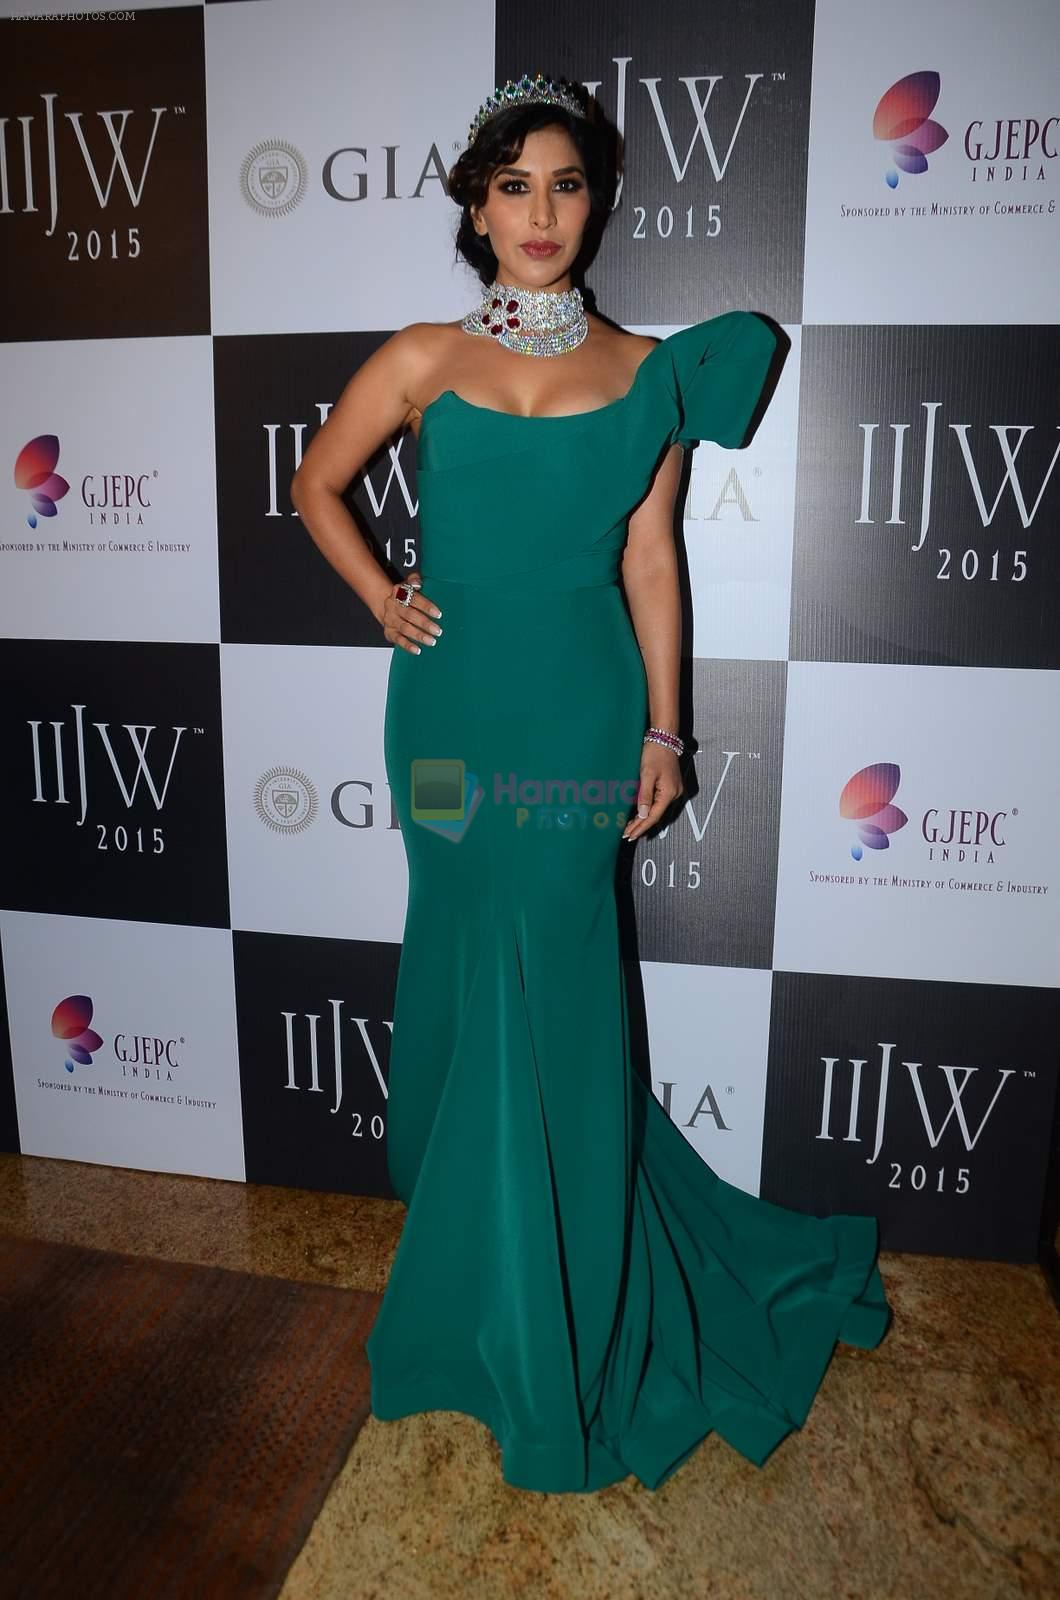 Sophie Chaudhary on Day 3 of IIJW 2015 on 5th Aug 2015